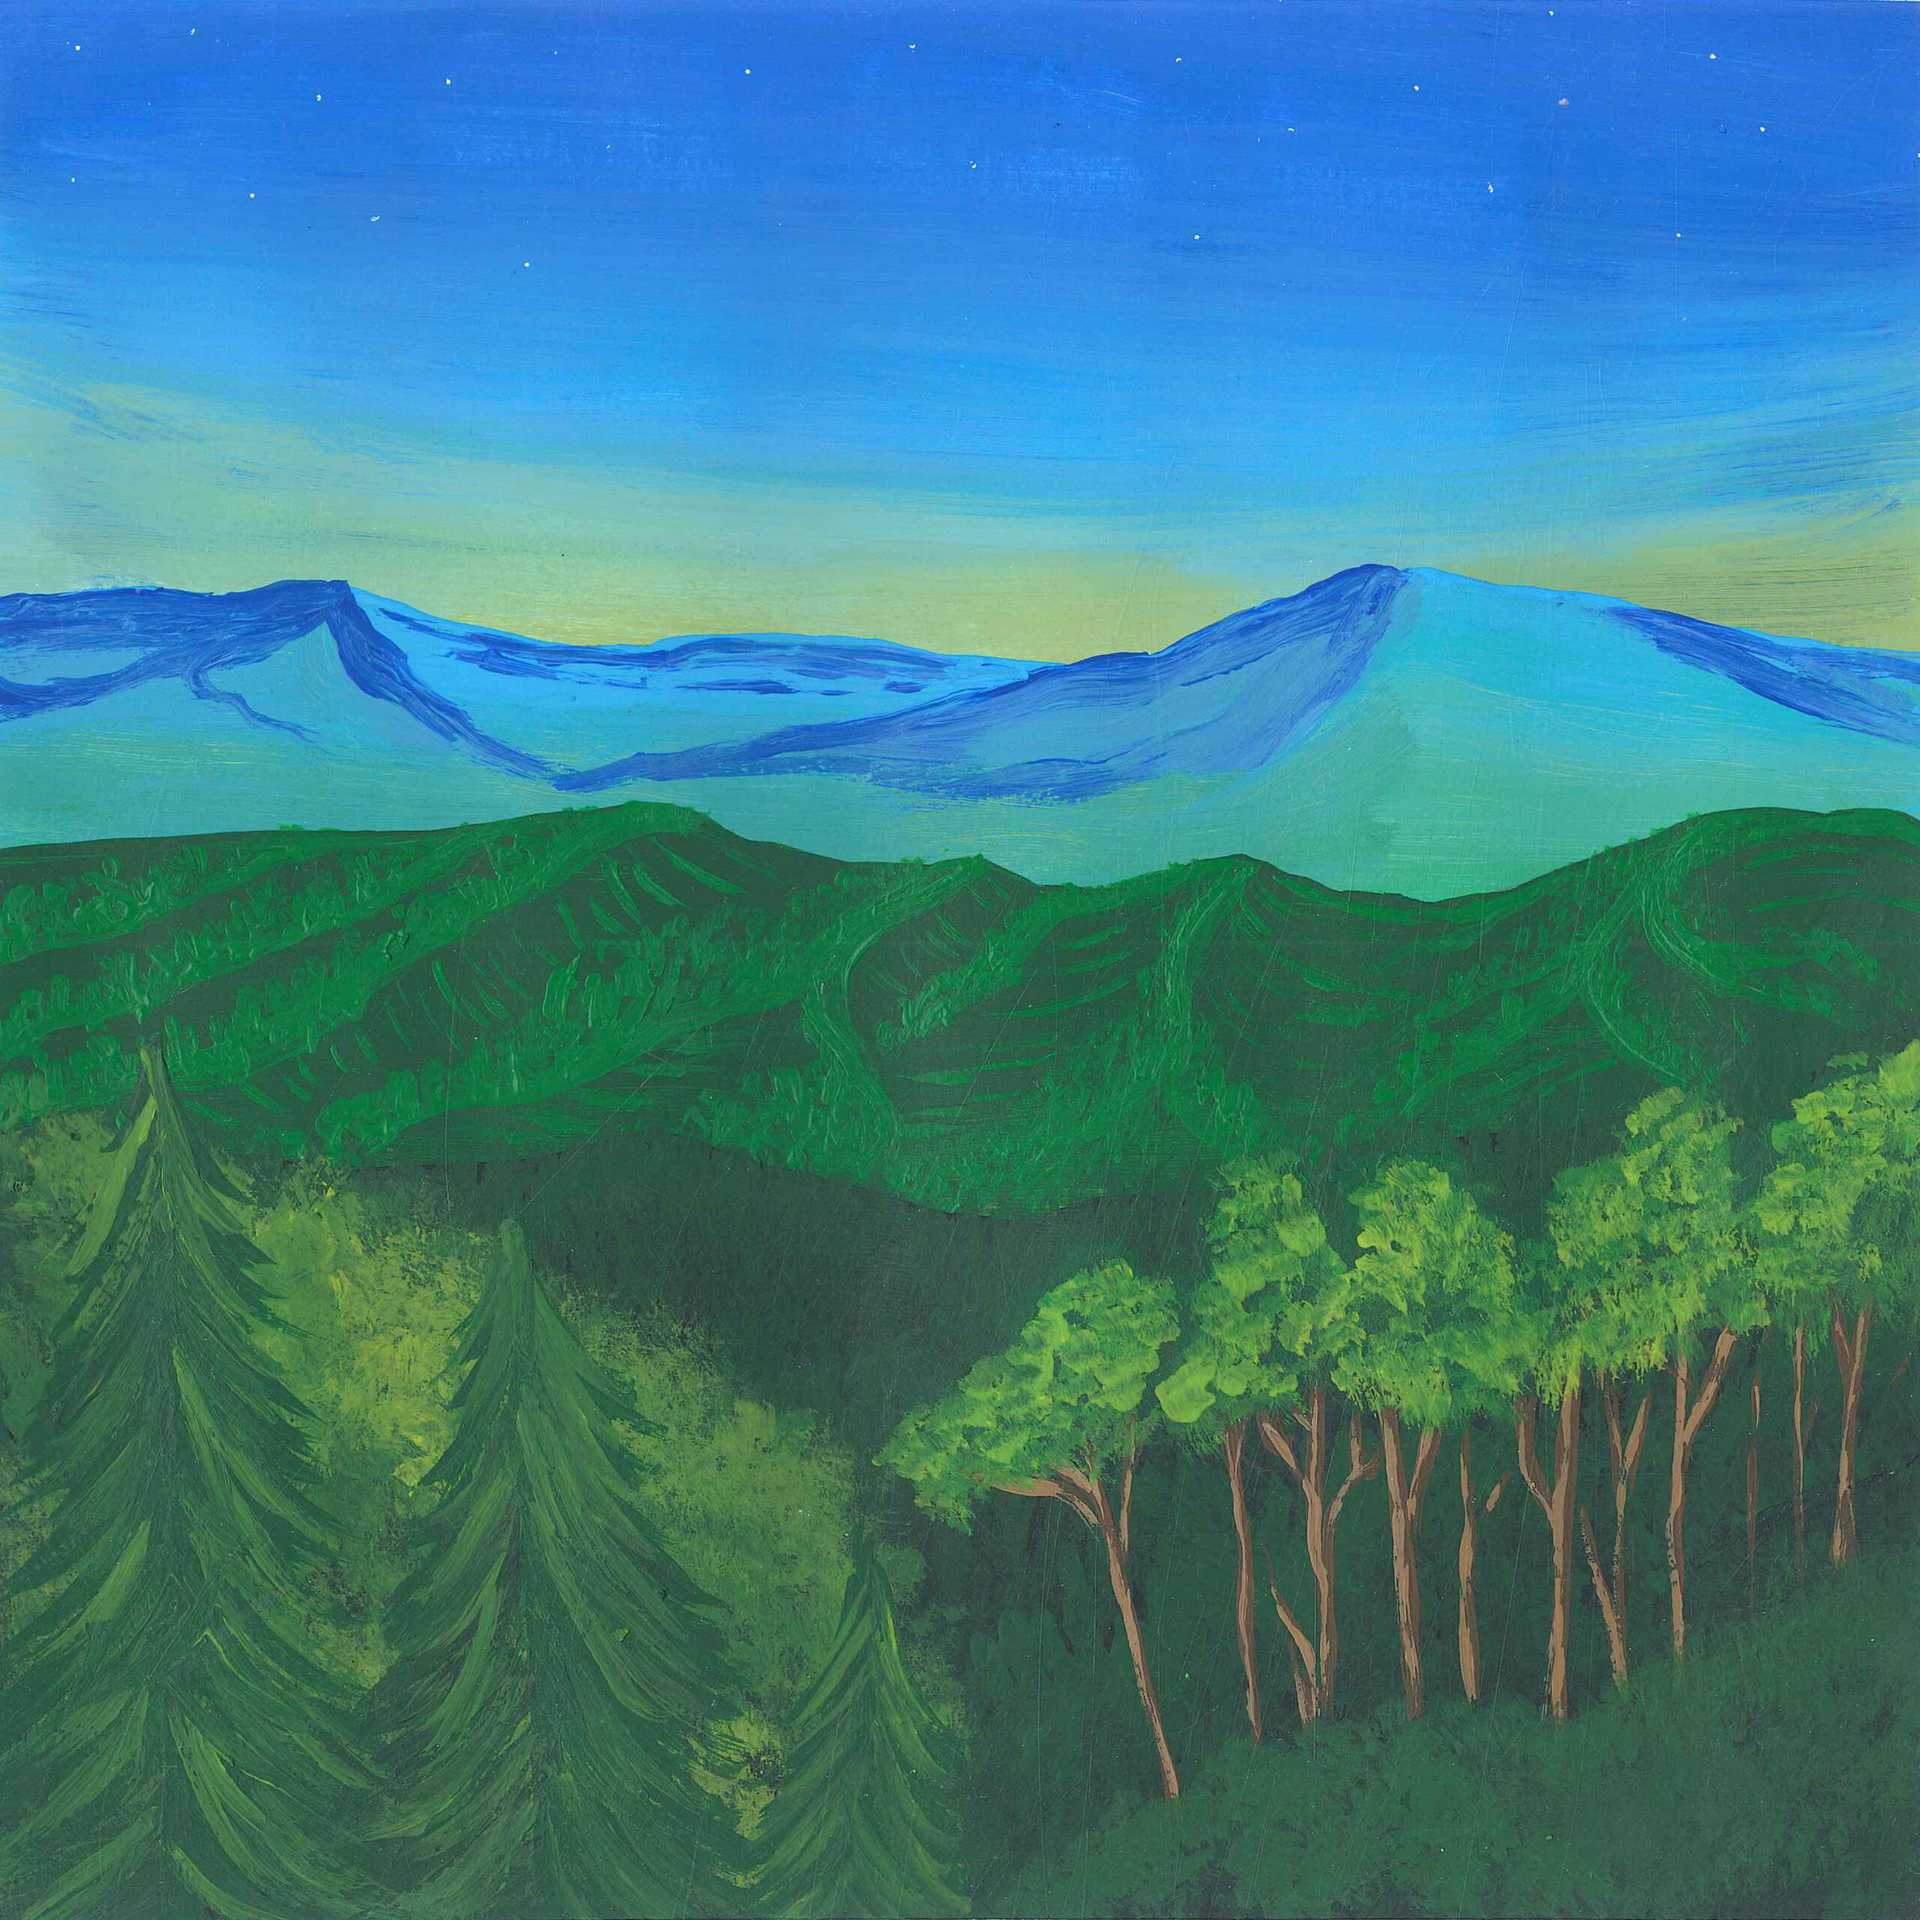 Evening in the mountains of Thailand - nature landscape painting - earth.fm